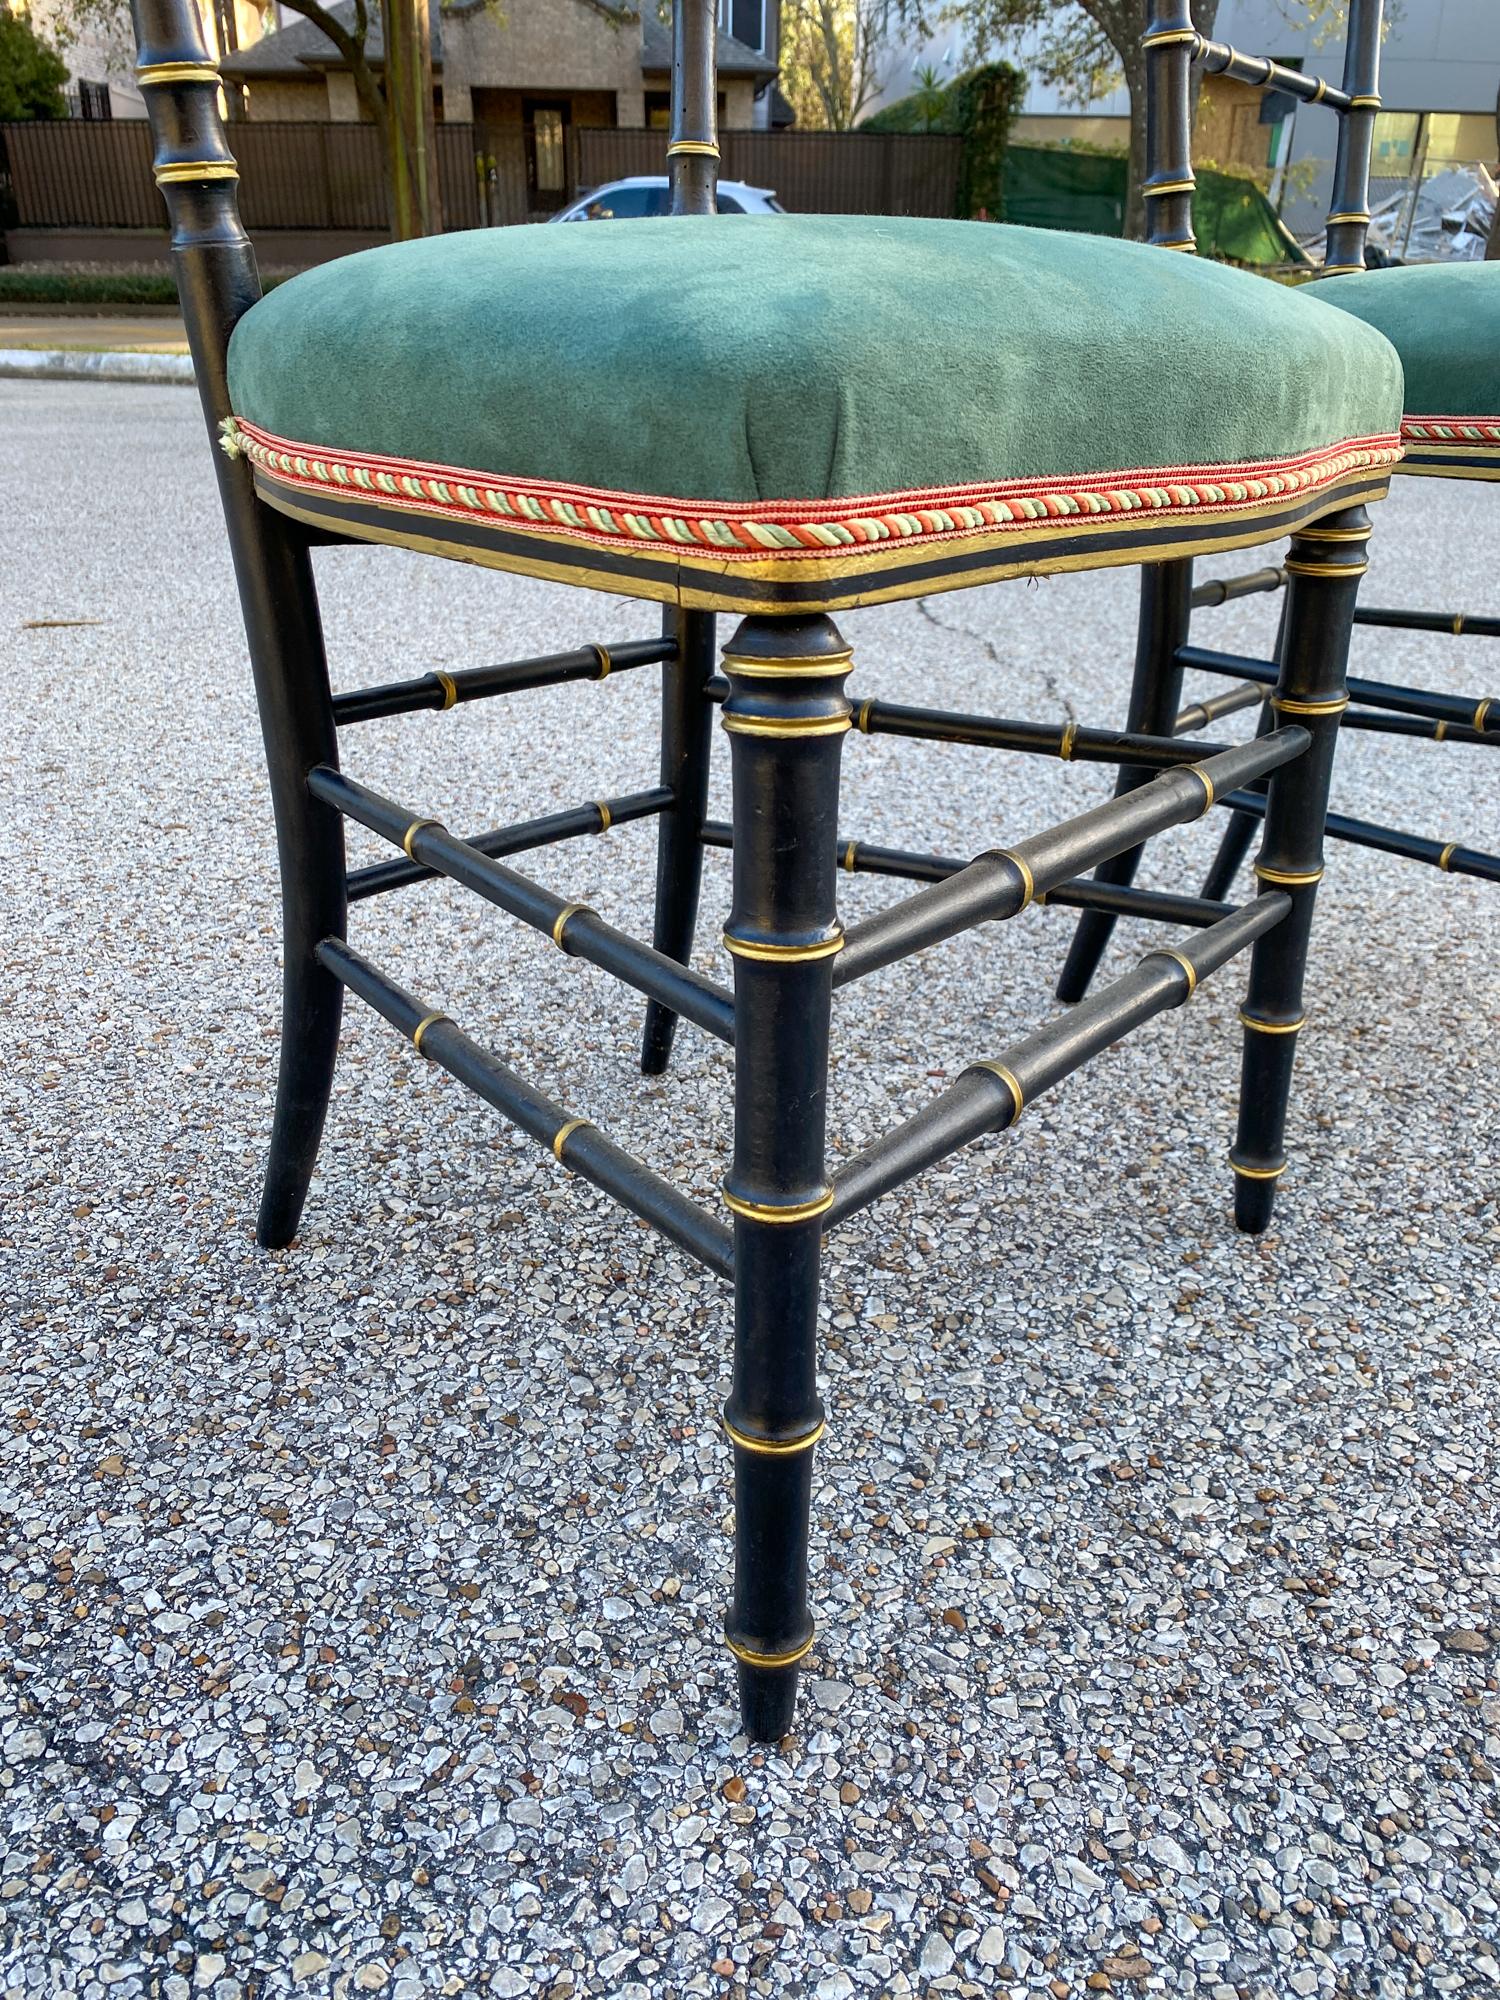 Early 20th Century Antique French Black & Gold Chinoiserie Style Chairs with Green Suede Seat